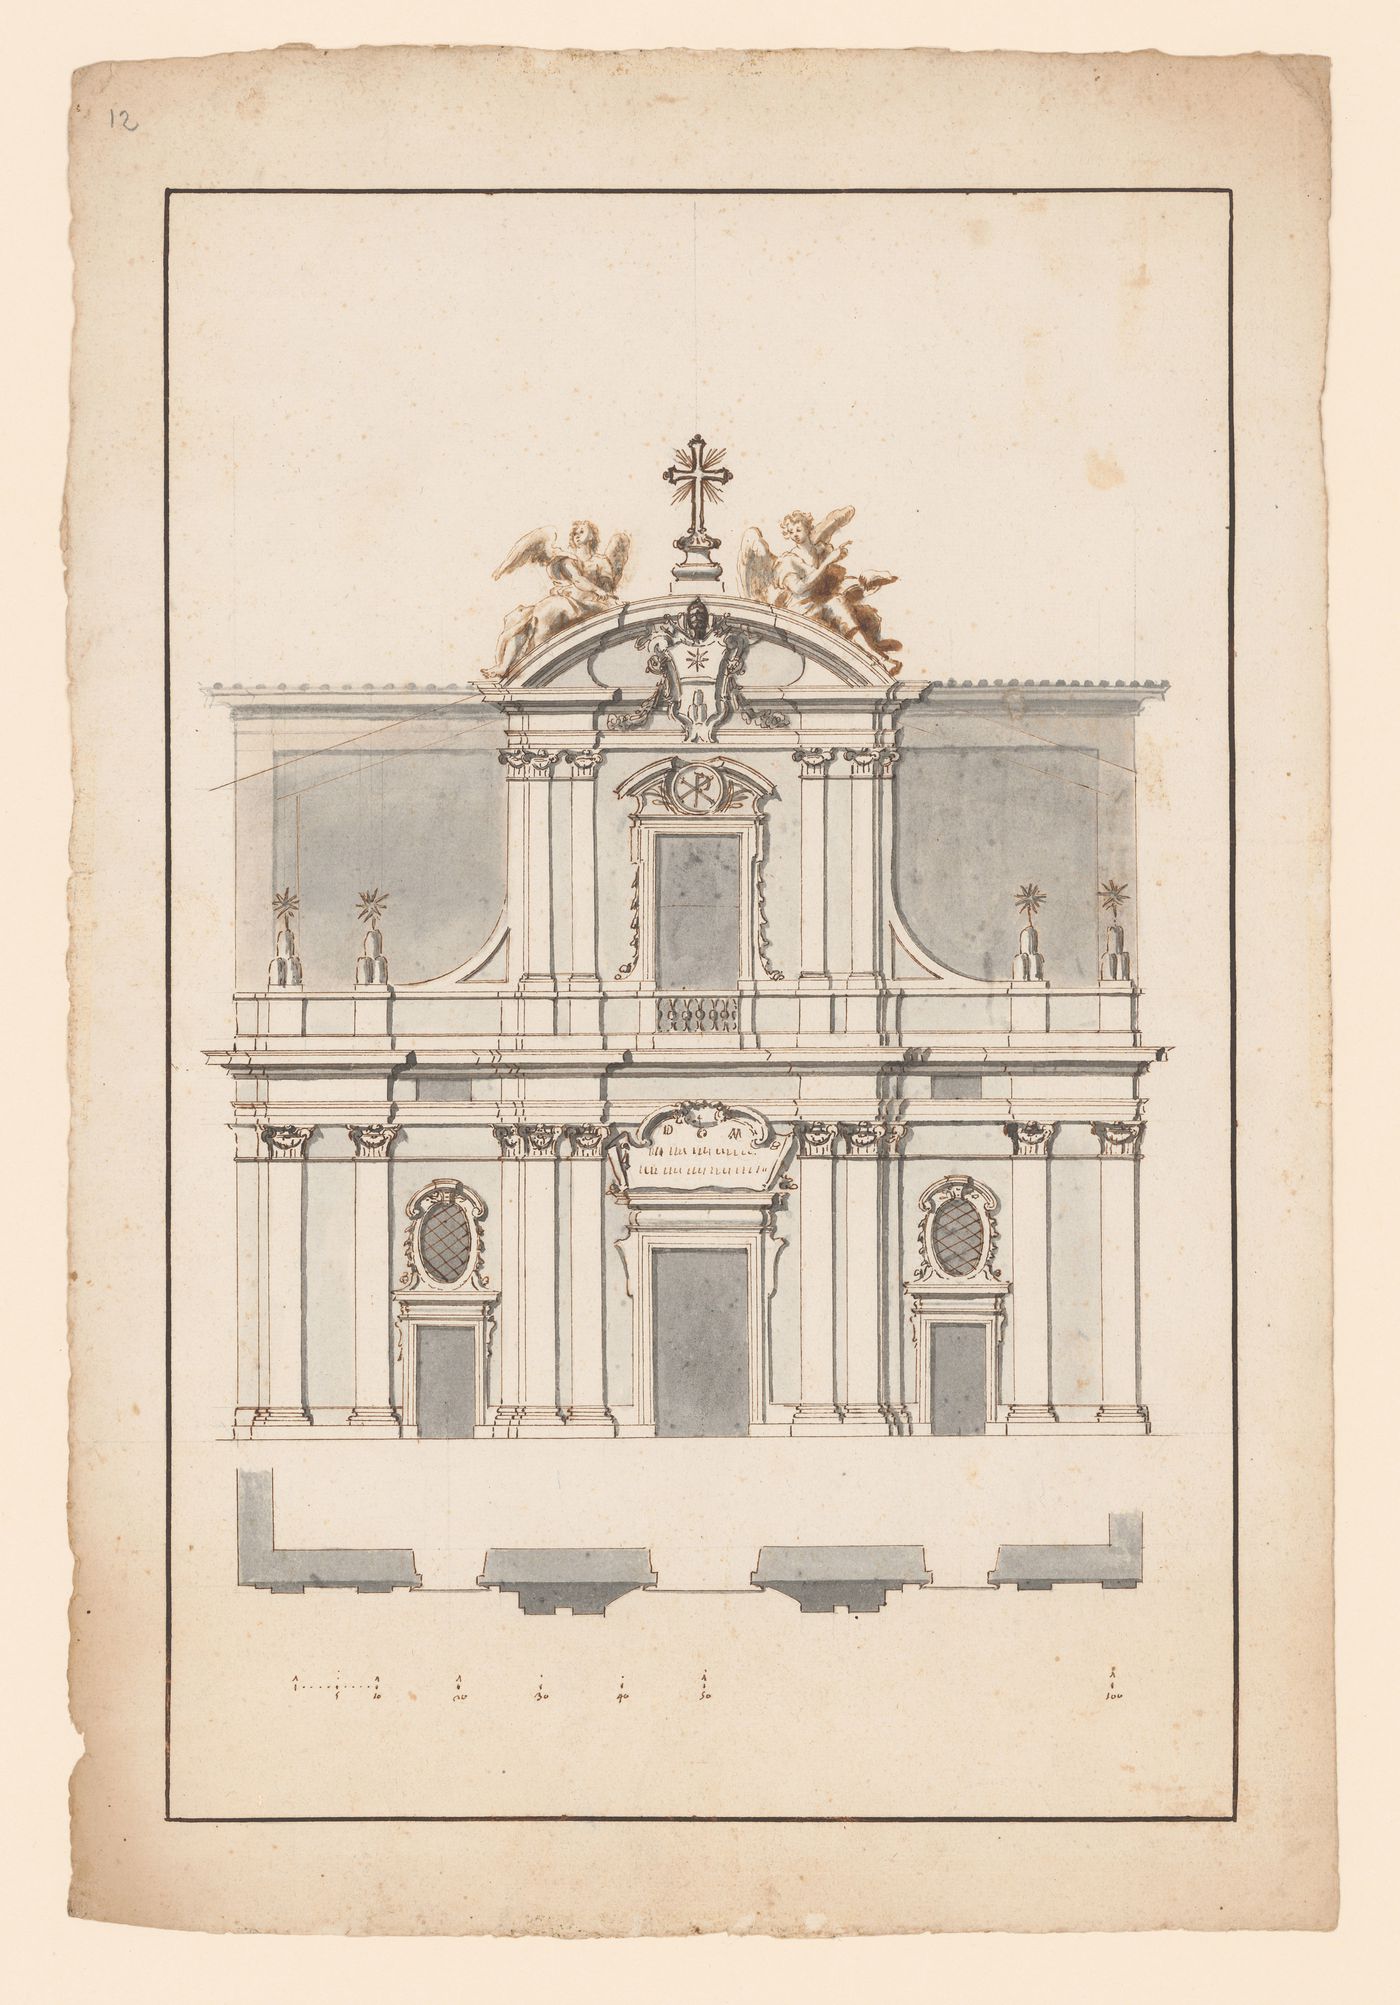 Elevation and plan of the façade of the church of S. Adriano, Rome